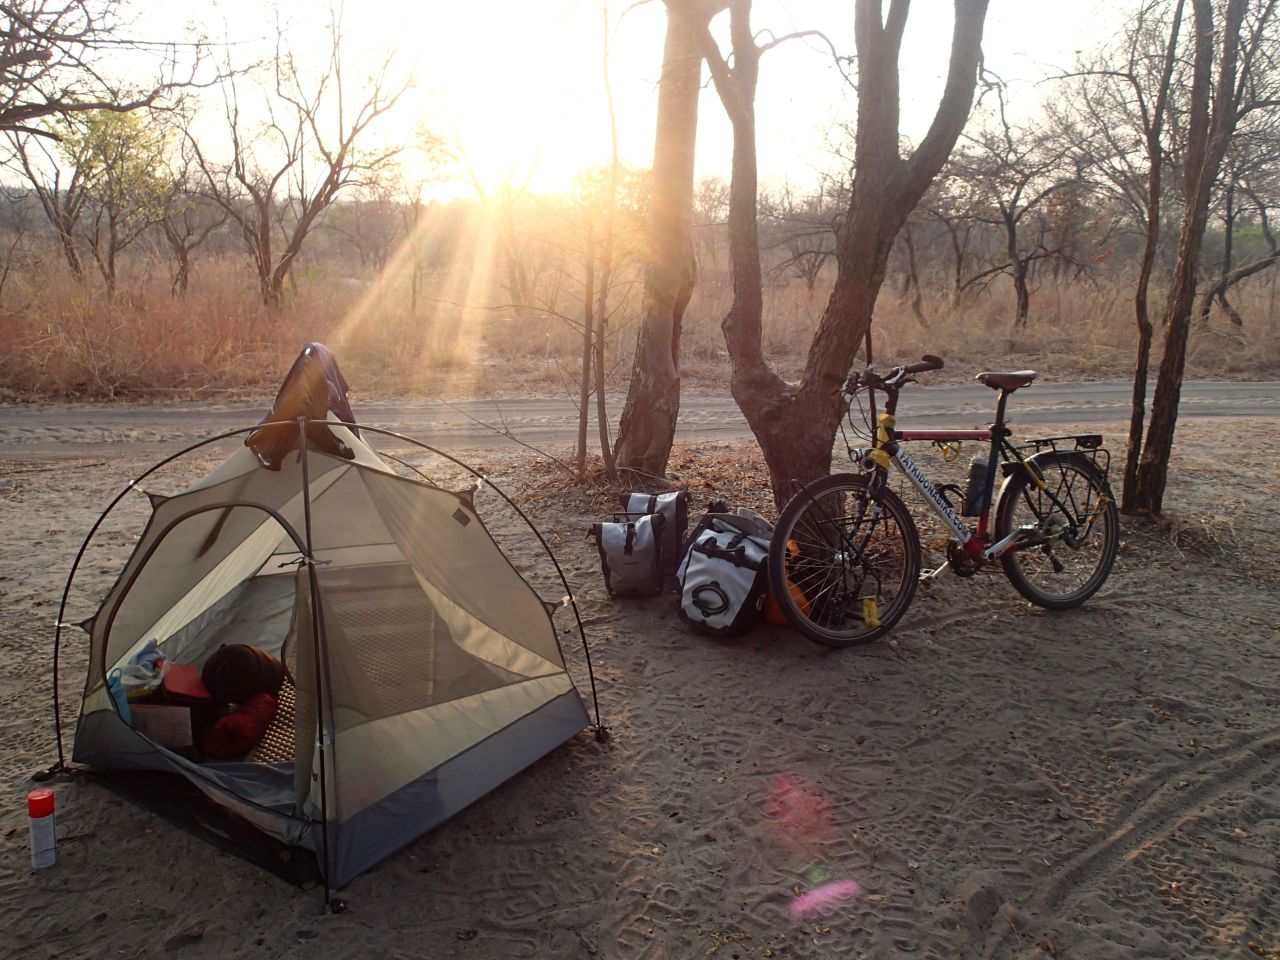 Rutland's bicycle and second tent, camped in the Ugandan bush. He lost his first tent in a fire on his first night in the Mozambique bush, which he started by knocking over his gas stove. 